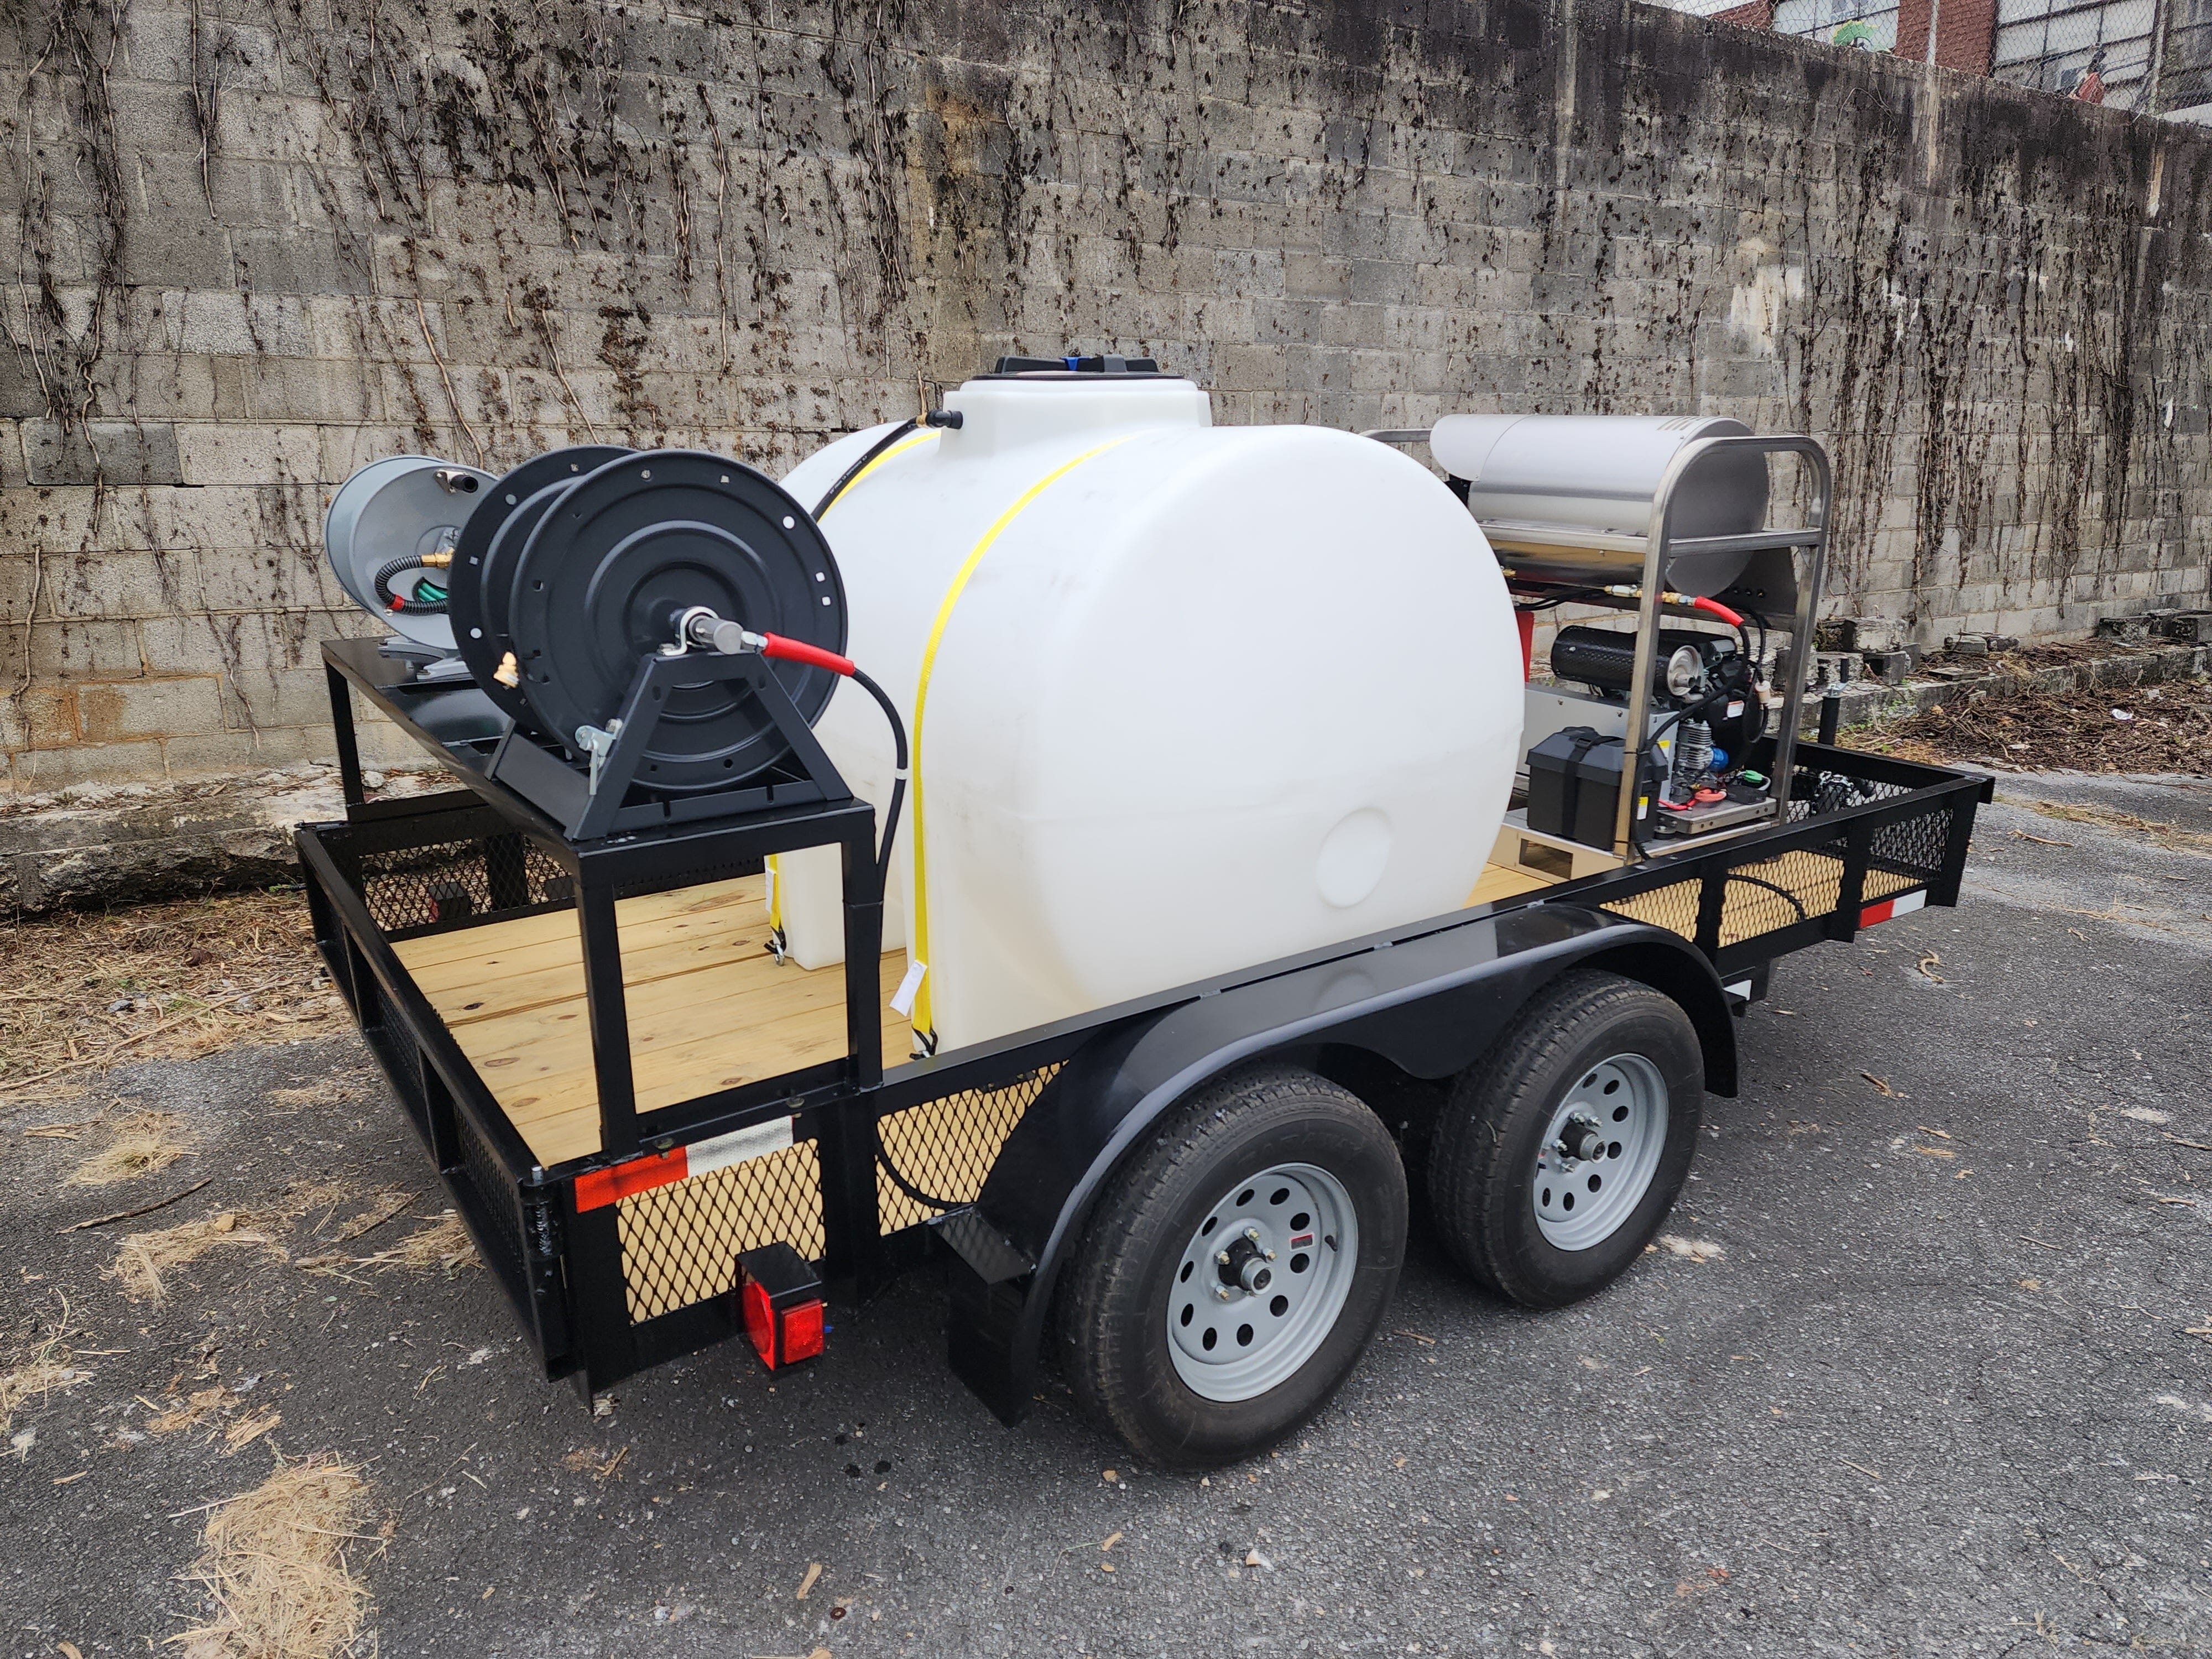 Hydro Max 8gpm at 4000psi Hot Water Trailer Package-SS Unit(Sale Price